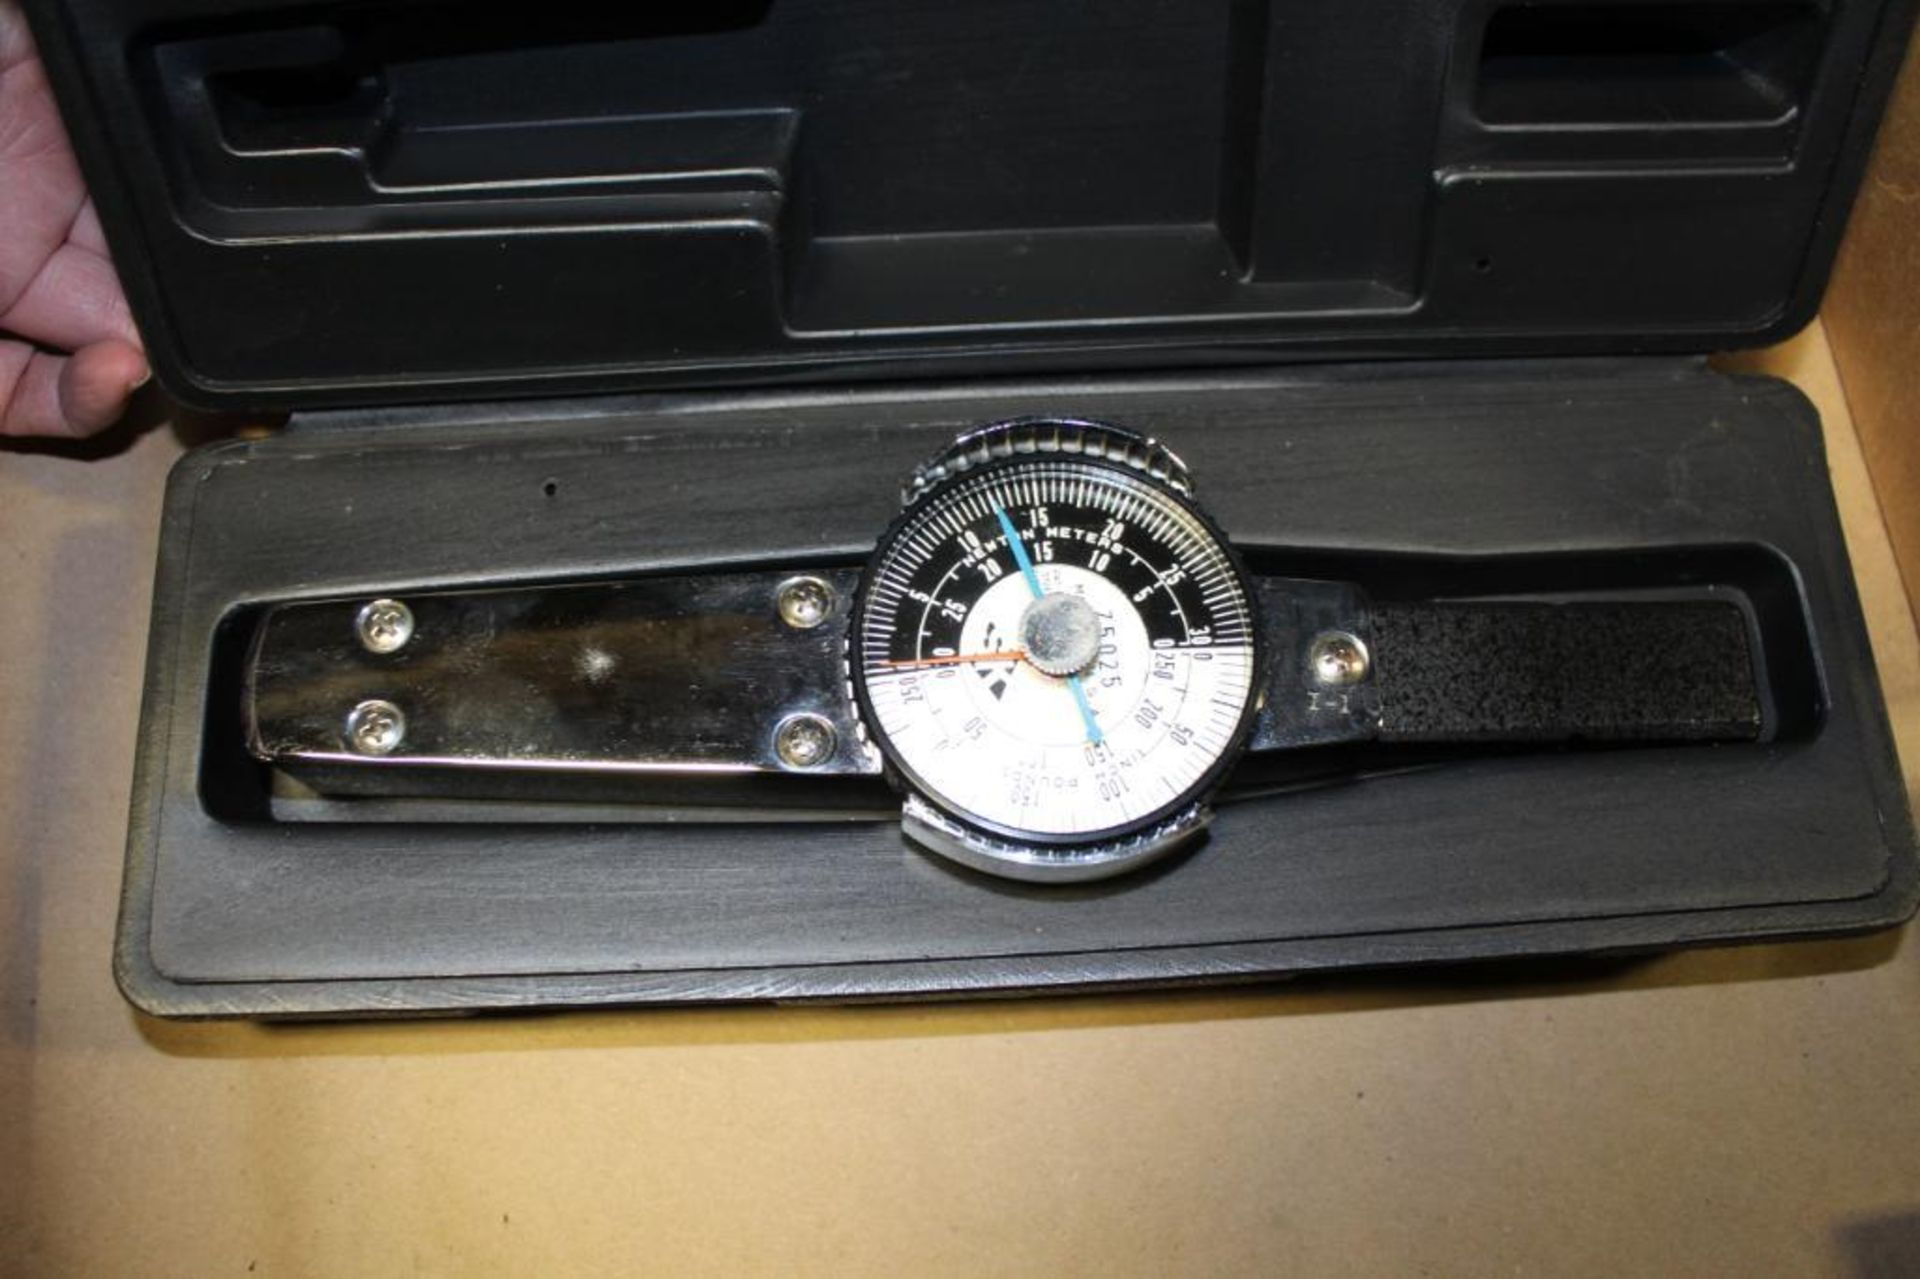 Dial Torque Wrench Model 75025